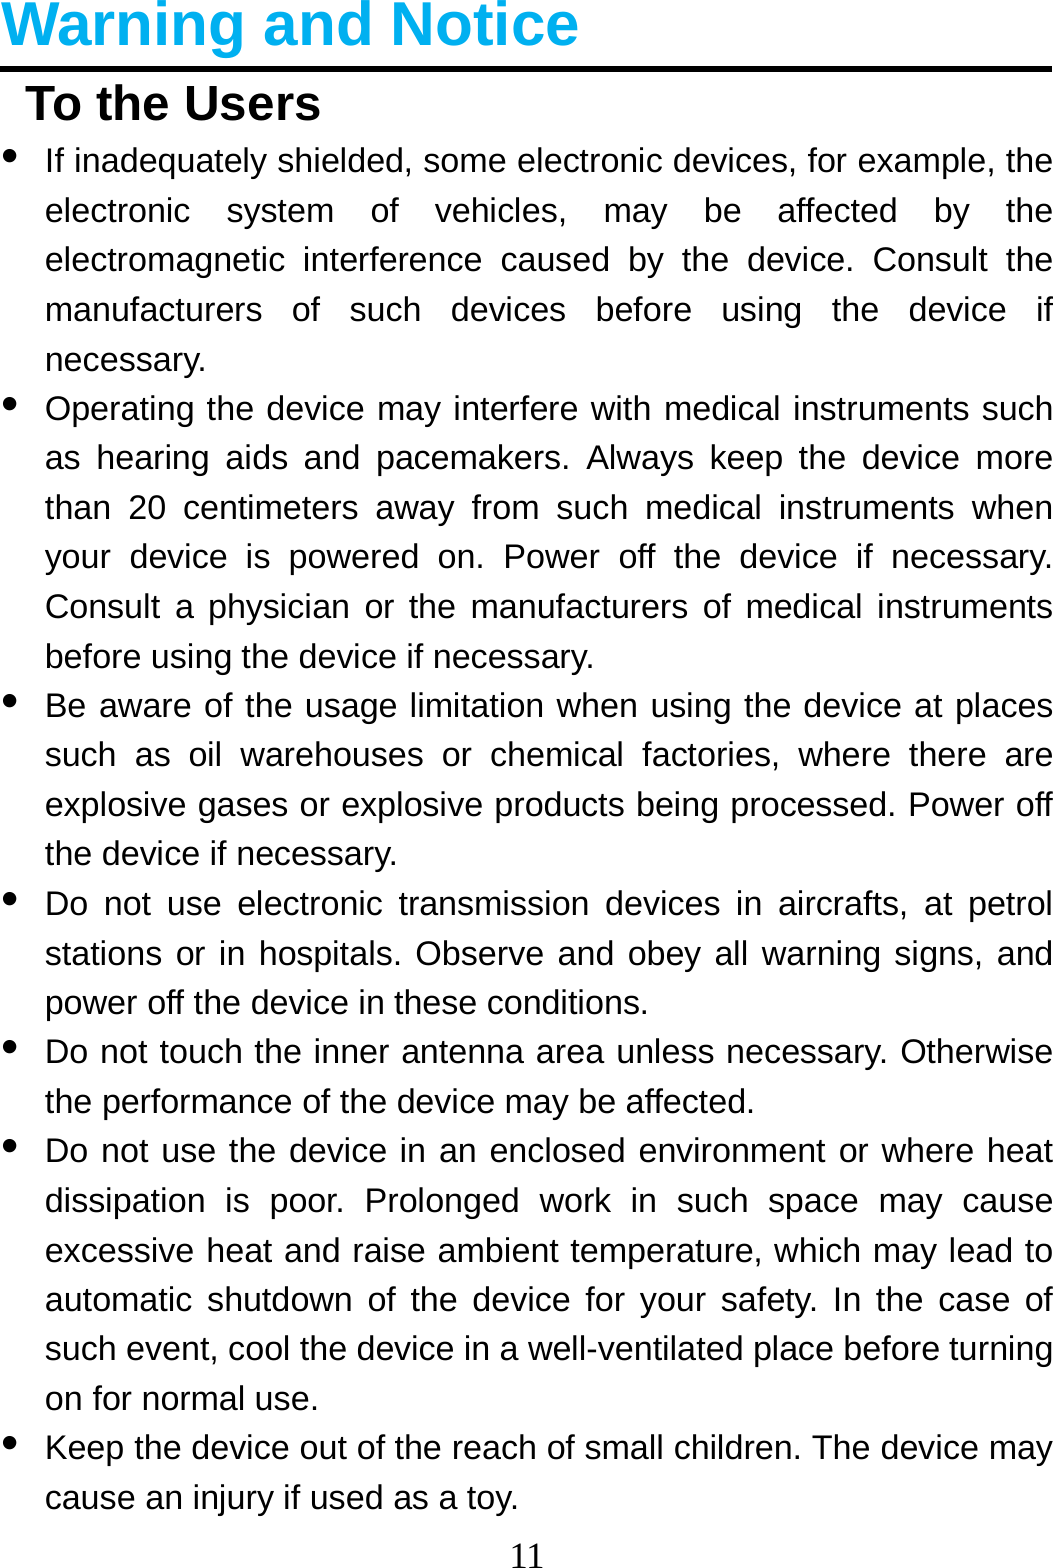 11  Warning and Notice   To the Users •  If inadequately shielded, some electronic devices, for example, the electronic system of vehicles, may be affected by the electromagnetic interference caused by the device. Consult the manufacturers of such devices before using the device if necessary. •  Operating the device may interfere with medical instruments such as hearing aids and pacemakers. Always keep the device more than 20 centimeters away from such medical instruments when your device is powered on. Power off the device if necessary. Consult a physician or the manufacturers of medical instruments before using the device if necessary. •  Be aware of the usage limitation when using the device at places such as oil warehouses or chemical factories, where there are explosive gases or explosive products being processed. Power off the device if necessary. •  Do not use electronic transmission devices in aircrafts, at petrol stations or in hospitals. Observe and obey all warning signs, and power off the device in these conditions. •  Do not touch the inner antenna area unless necessary. Otherwise the performance of the device may be affected. •  Do not use the device in an enclosed environment or where heat dissipation is poor. Prolonged work in such space may cause excessive heat and raise ambient temperature, which may lead to automatic shutdown of the device for your safety. In the case of such event, cool the device in a well-ventilated place before turning on for normal use. •  Keep the device out of the reach of small children. The device may cause an injury if used as a toy. 